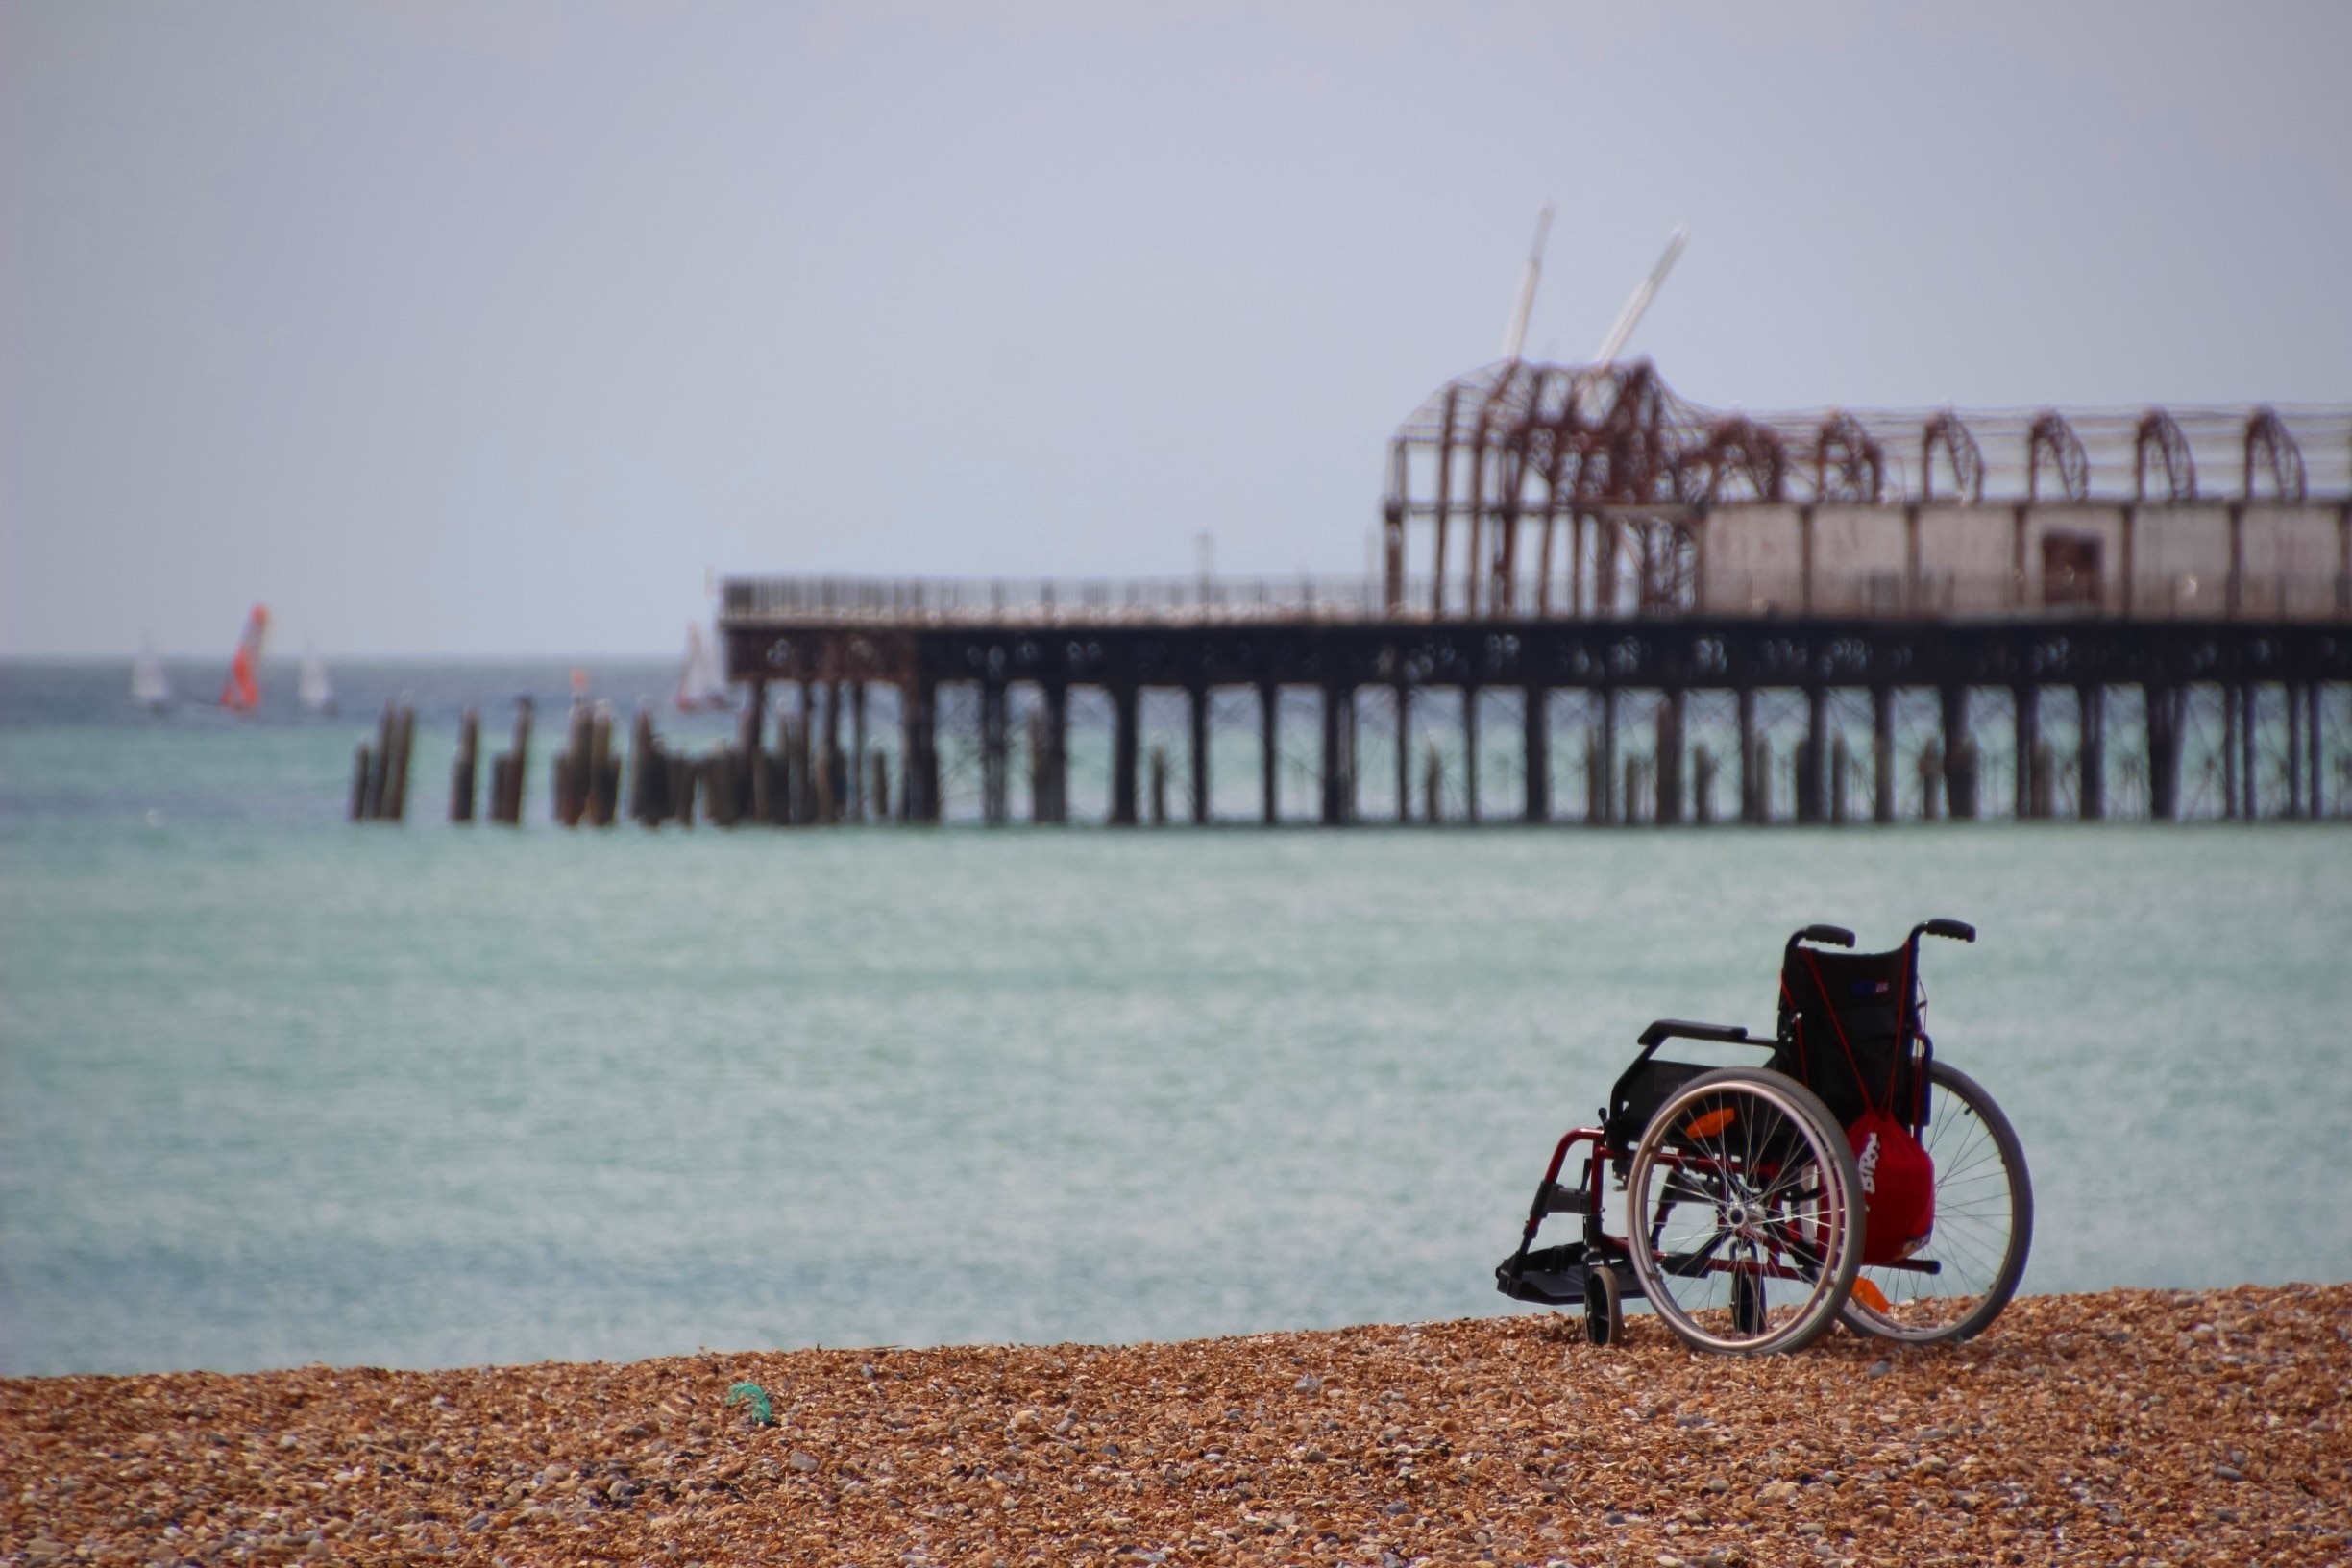 April 2014

A seemingly abandoned wheelchair sitting on Hastings beach in front of the burnt out remains of the town's pier.

#BeachBound